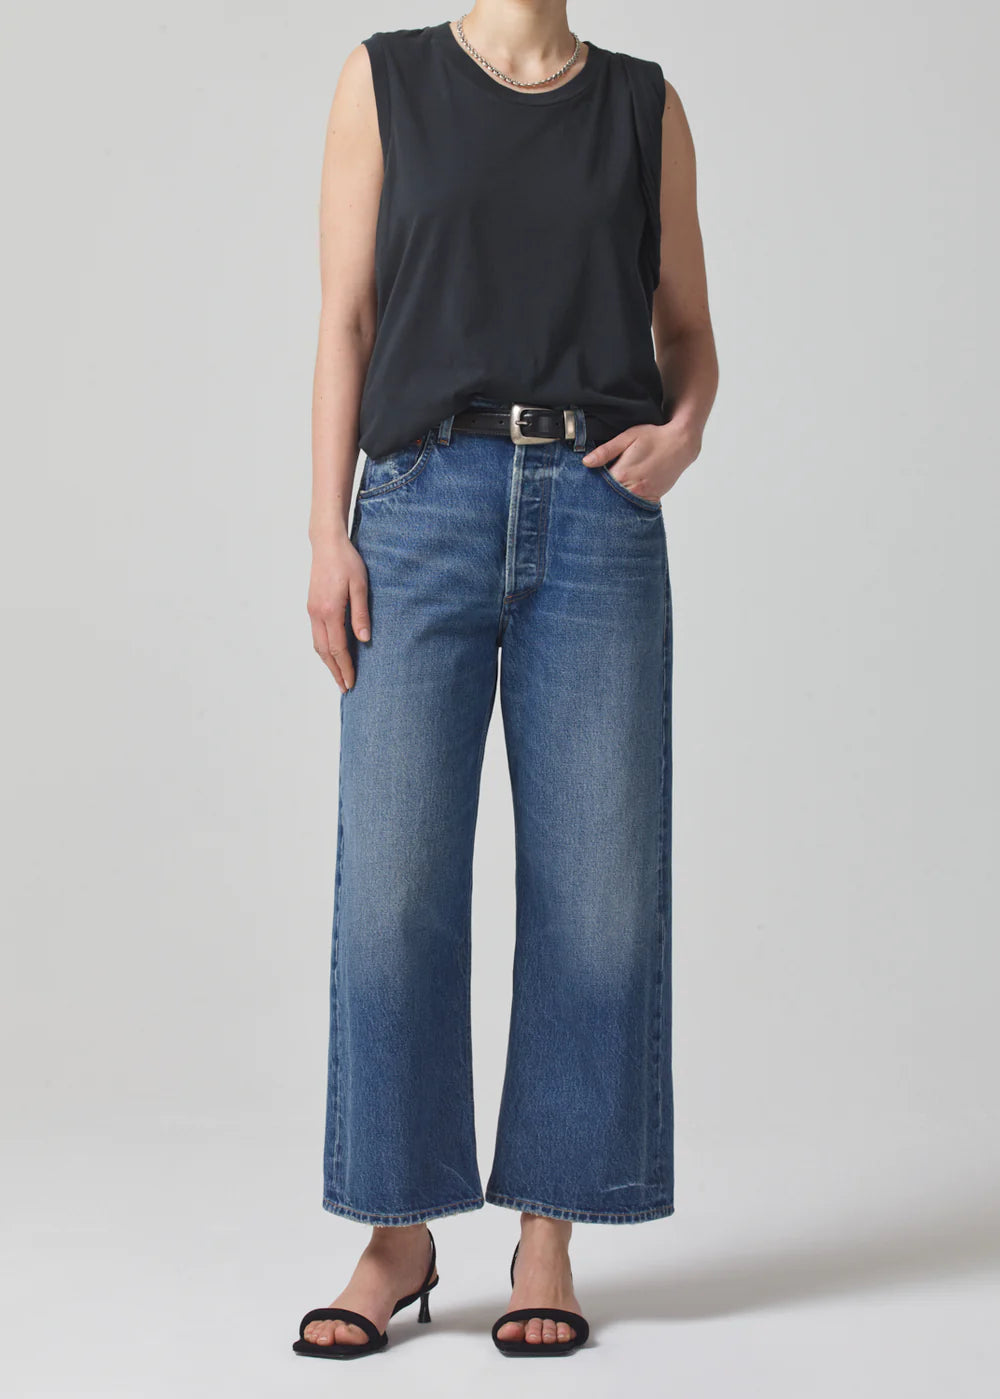 Citizens of Humanity Guacho Jeans, denim, jeans, wide-leg jeans, women's clothing